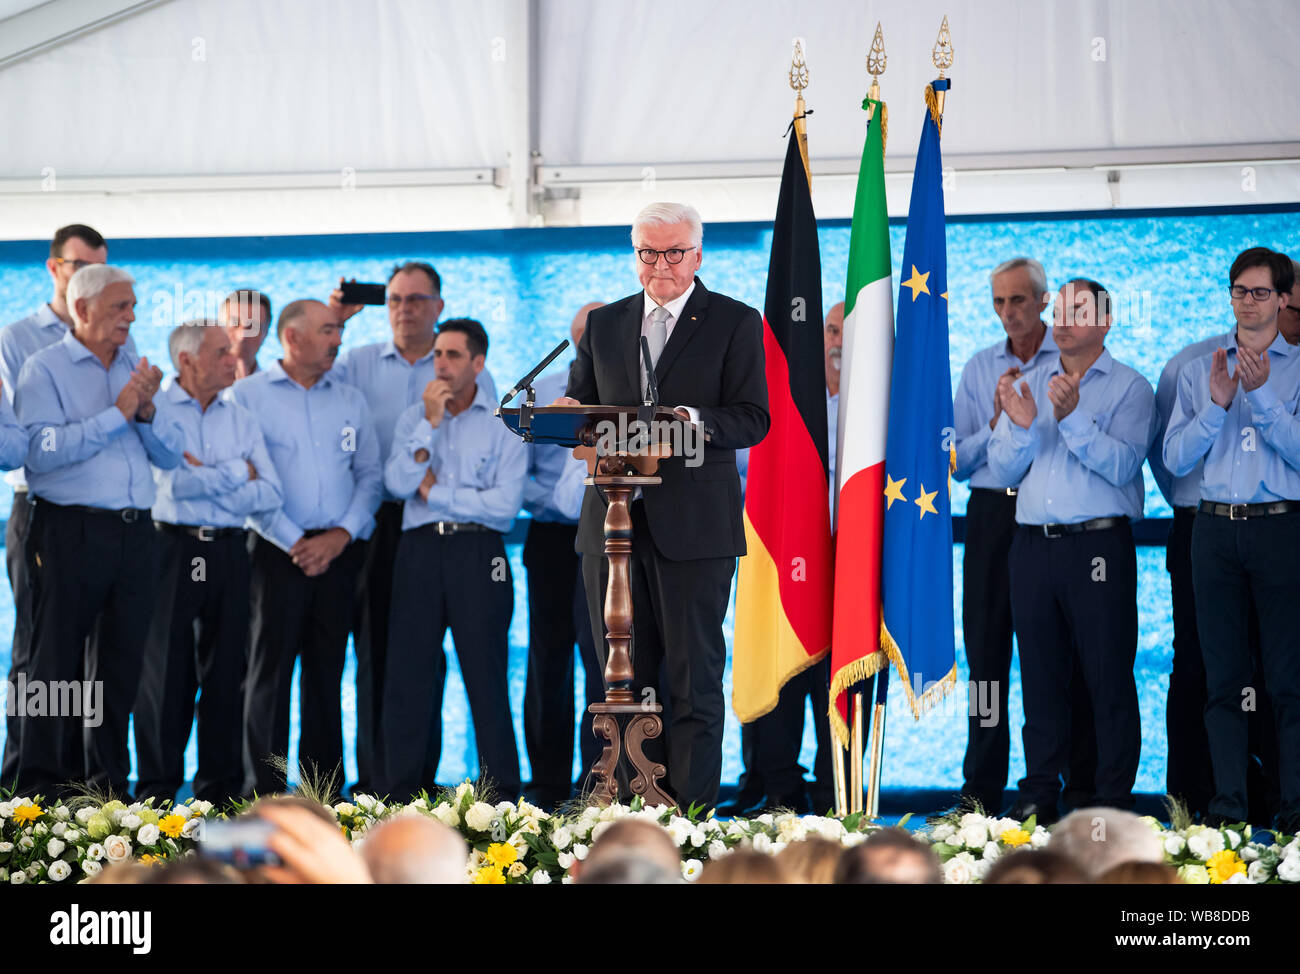 Fivizzano, Italy. 25th August 2019. President Frank-Walter Steinmeier gives an Italian speech at the commemoration ceremony for the victims of the Fivizzano massacres. In the final phase of the Second World War, Wehrmacht soldiers and SS murdered several thousand civilians in Italy. 75 years ago, in the region around Fivizzano in northern Tuscany alone, almost 400 men, women, old people and children were murdered by the Germans, often in an unimaginably cruel way, in a massacre lasting several days. Federal President Steinmeier and his wife take part in the annual commemoration ceremony for th Stock Photo